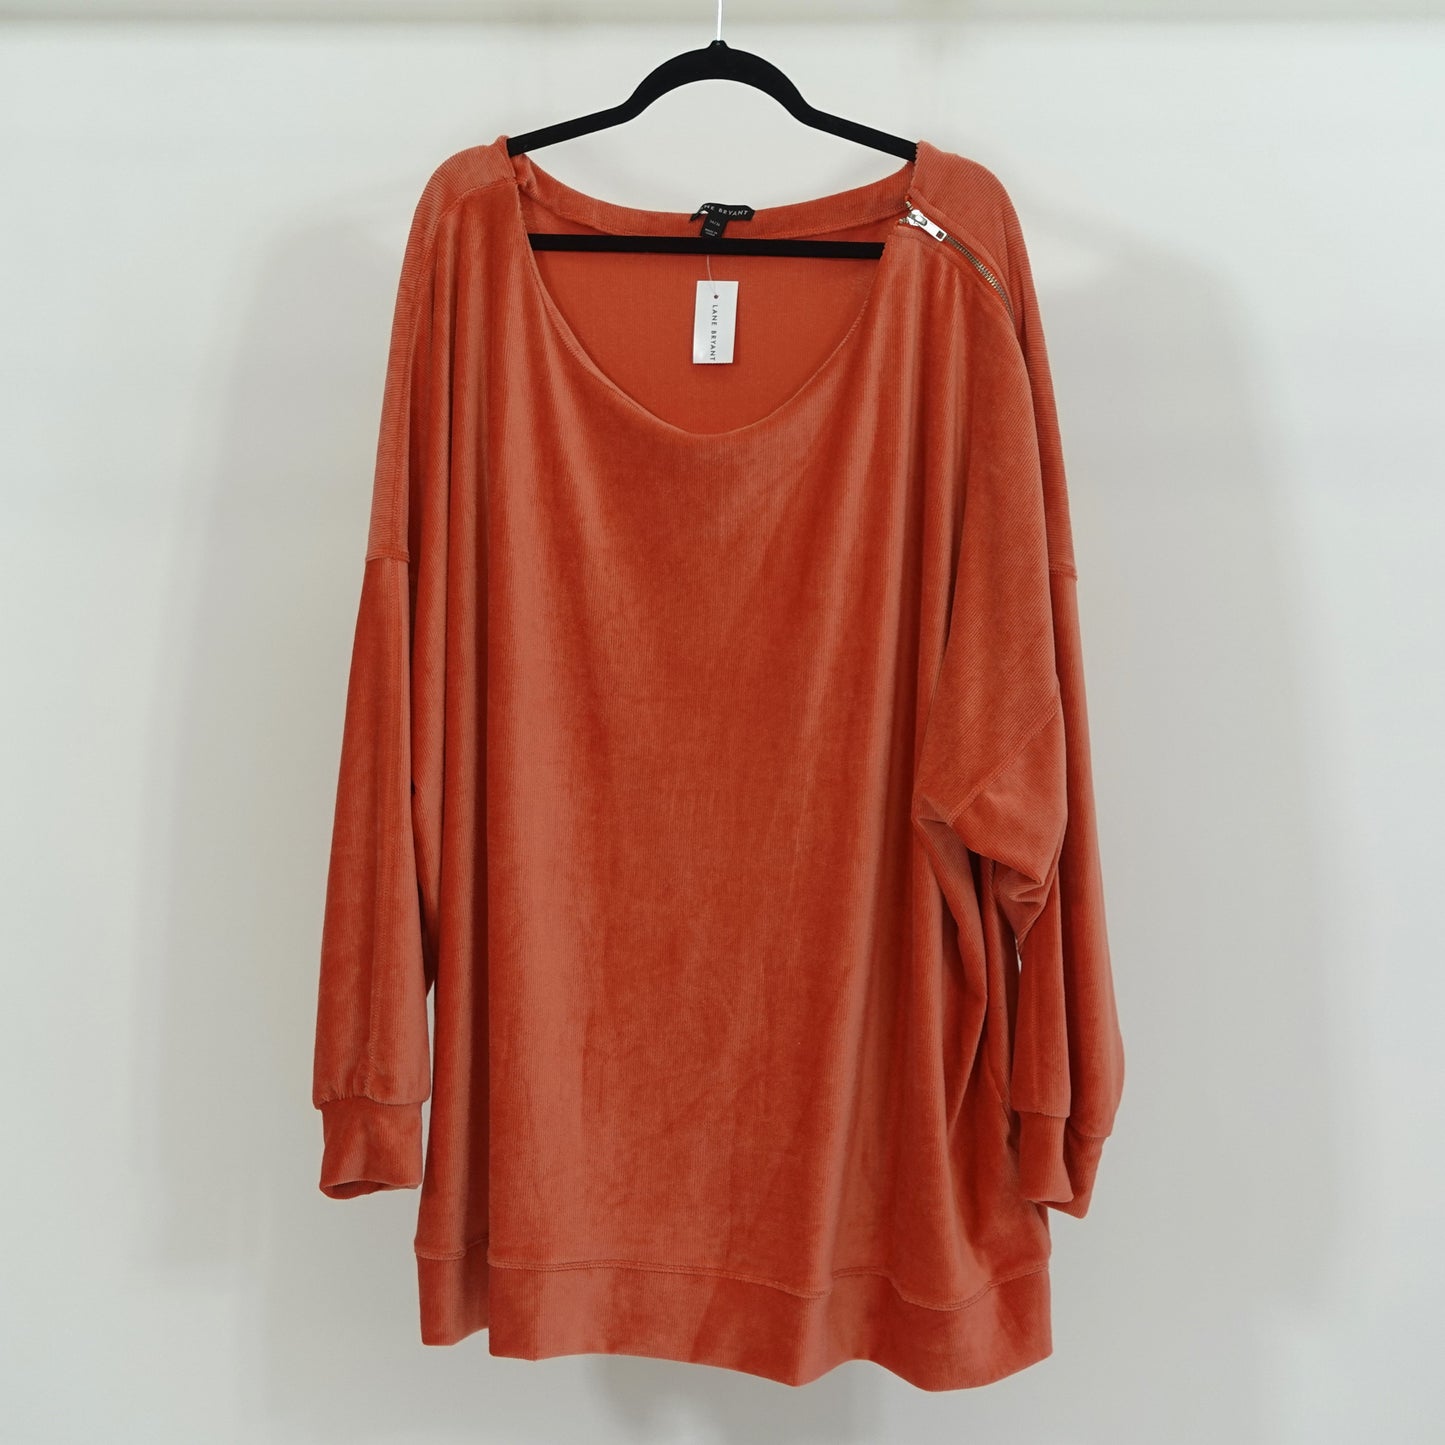 Lightweight Long Sleeve Coral Top NWT